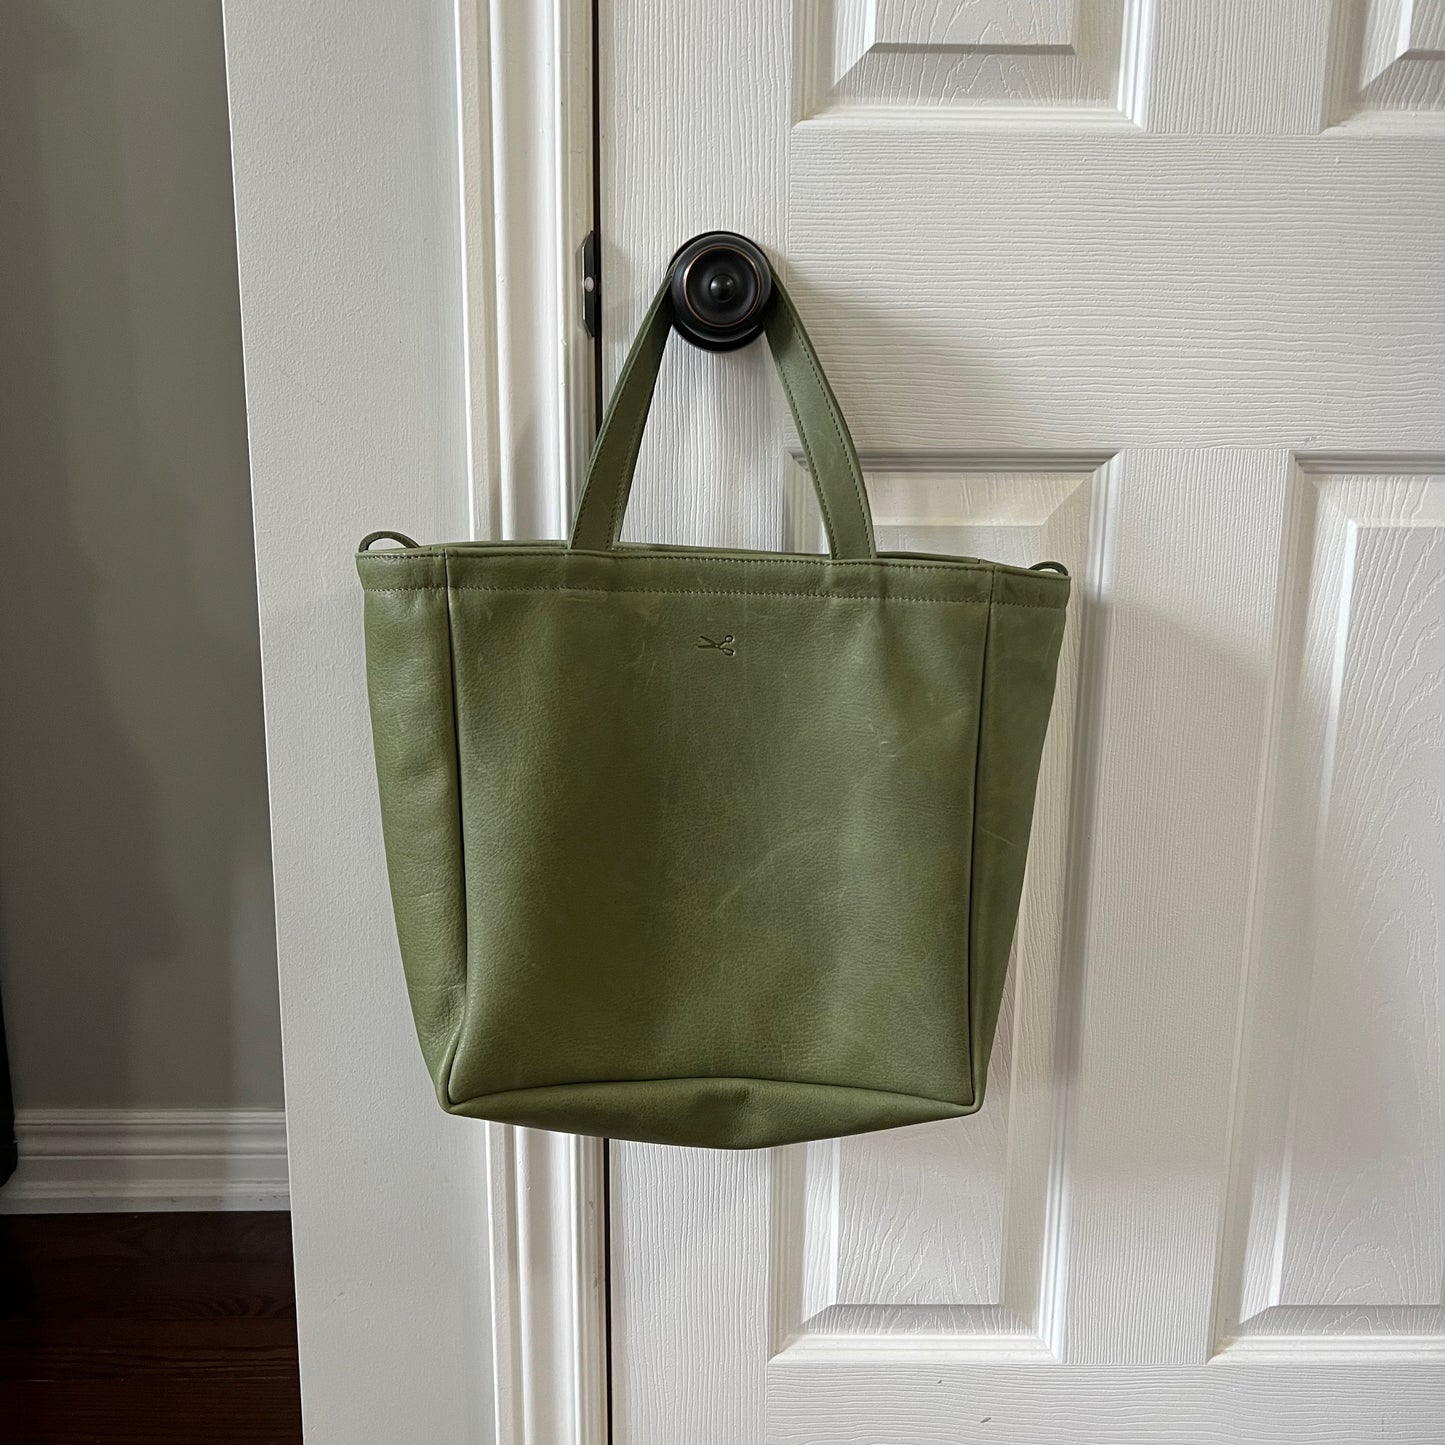 SALE Small Leather Tote Bag